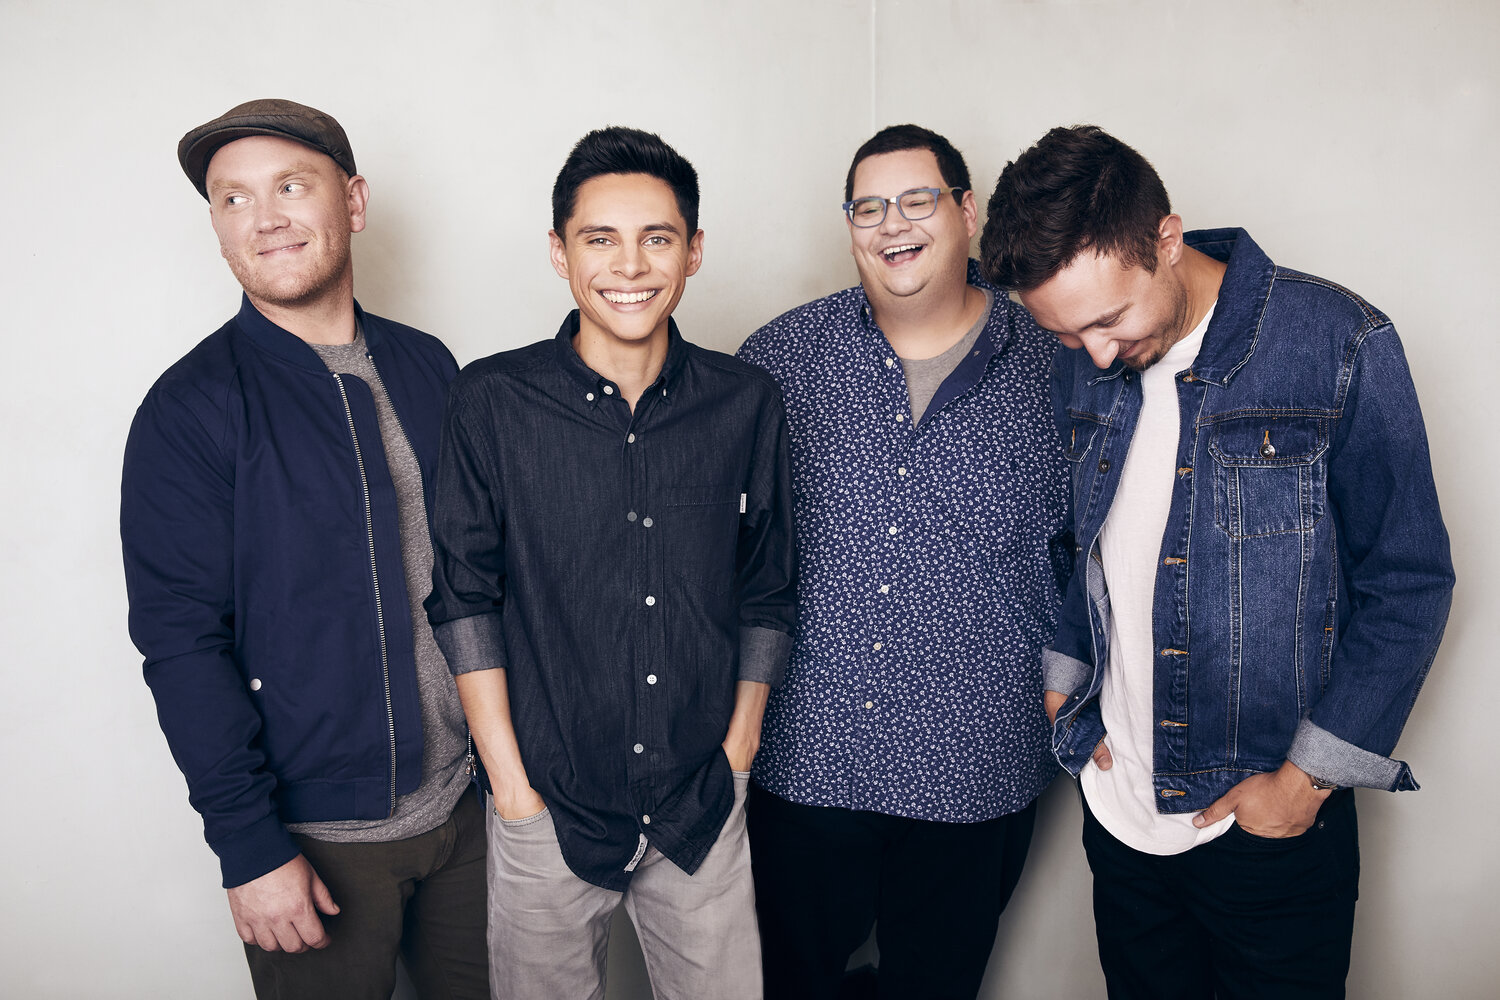 the four members of the sidewalk prophets standing side by side in front of a white backdrop